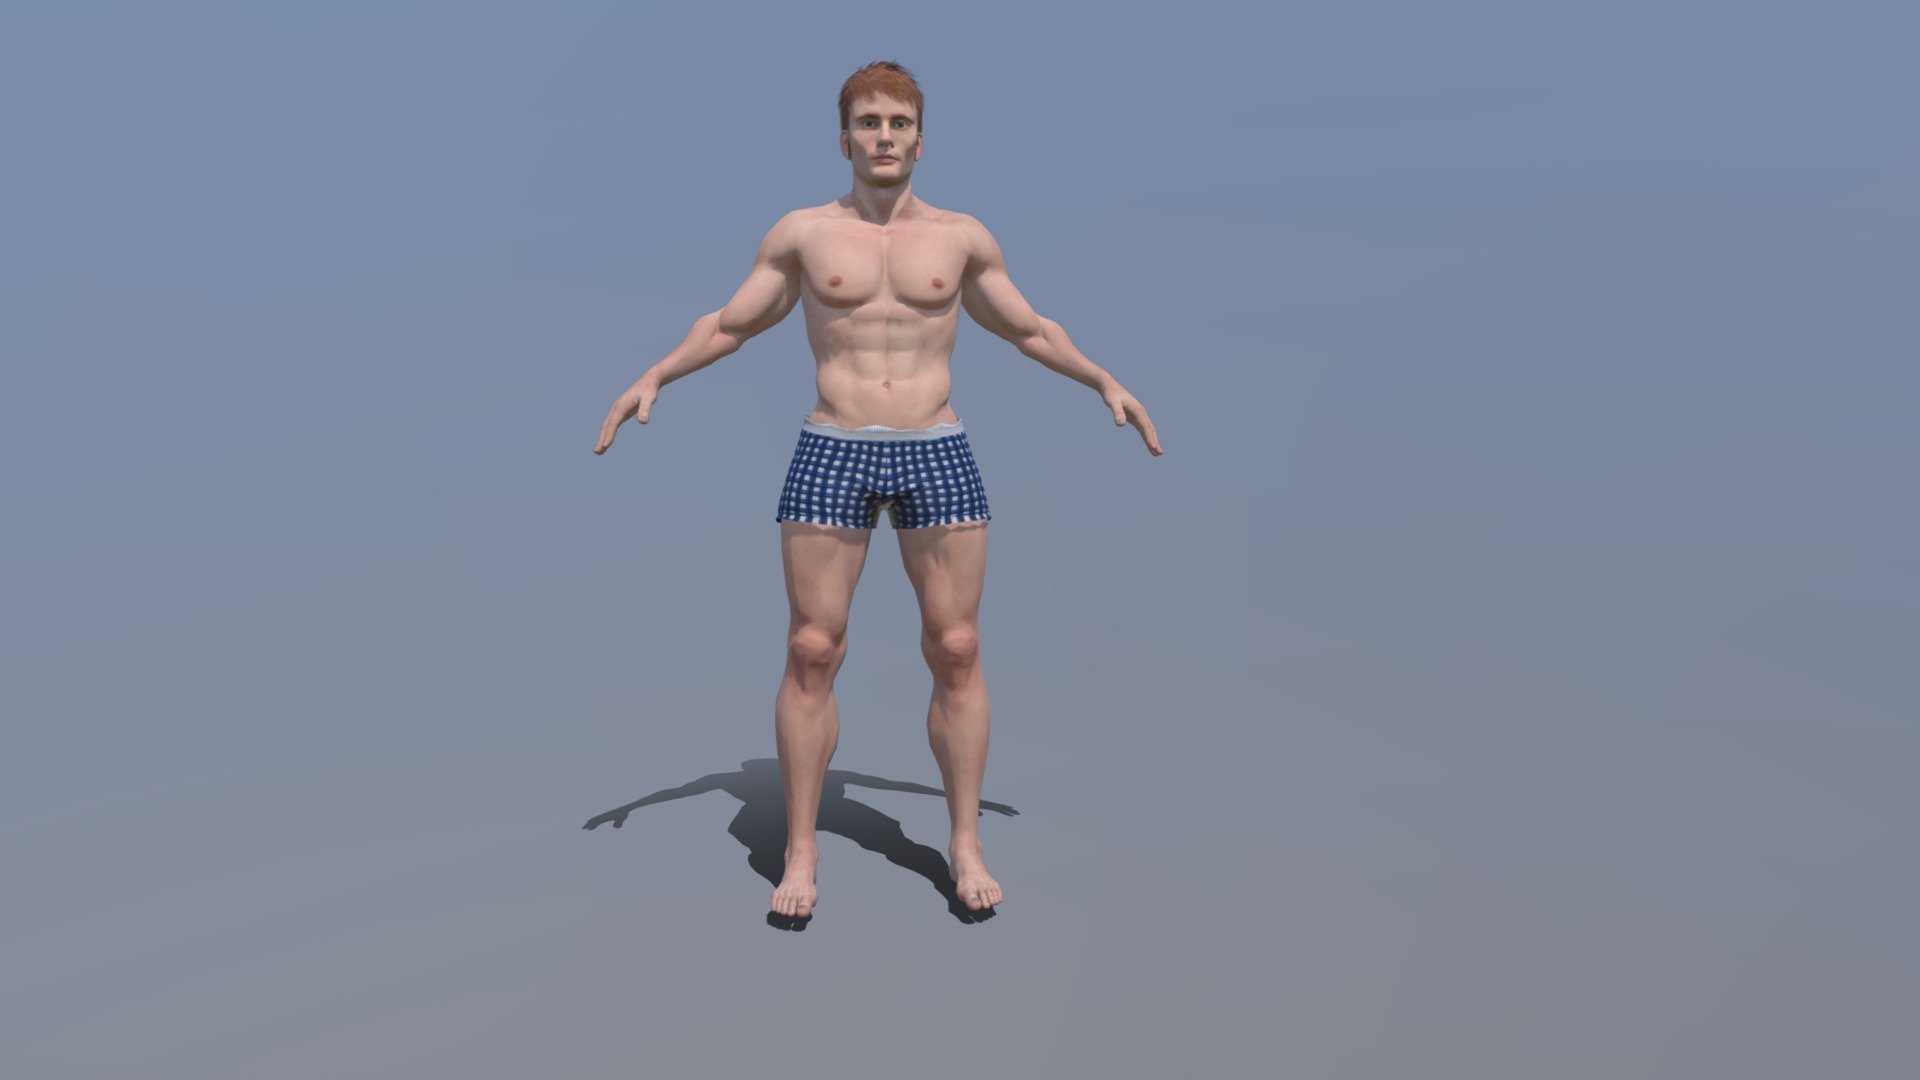 DAVID REALISTIC CHARACTER

-REALISTIC RIGGED CHARACTER
-HIGH QUALITY PBR TEXTURES APPLIED
- UV MAPPED TEXTURES
- RIGGED ,ANIMATED

POLYGON DETAILS:-


   *BODY       = 13100(POLY)---26200(TRI)---13286(VERT)--- 
   *EYE          =     640(POLY)----1280(TRI)-------648(VERT)---
   *TOUNGUE=     296(POLY)------592(TRI)-------309(VERT)--- 
   *TEETH      =   2421(POLY)----4842(TRI)------2642(VERT)---
   *HAIR         =   5499(POLY)----5499(TRI)------6444(VERT)---
   *SHORTS   =    606(POLY)-----1212(TRI)------ 648(VERT)---

   *TOTAL       =22562(POLY)---39625(TRI)----23977(VERT)---
 - DAVID - Buy Royalty Free 3D model by jasirkt 3d model